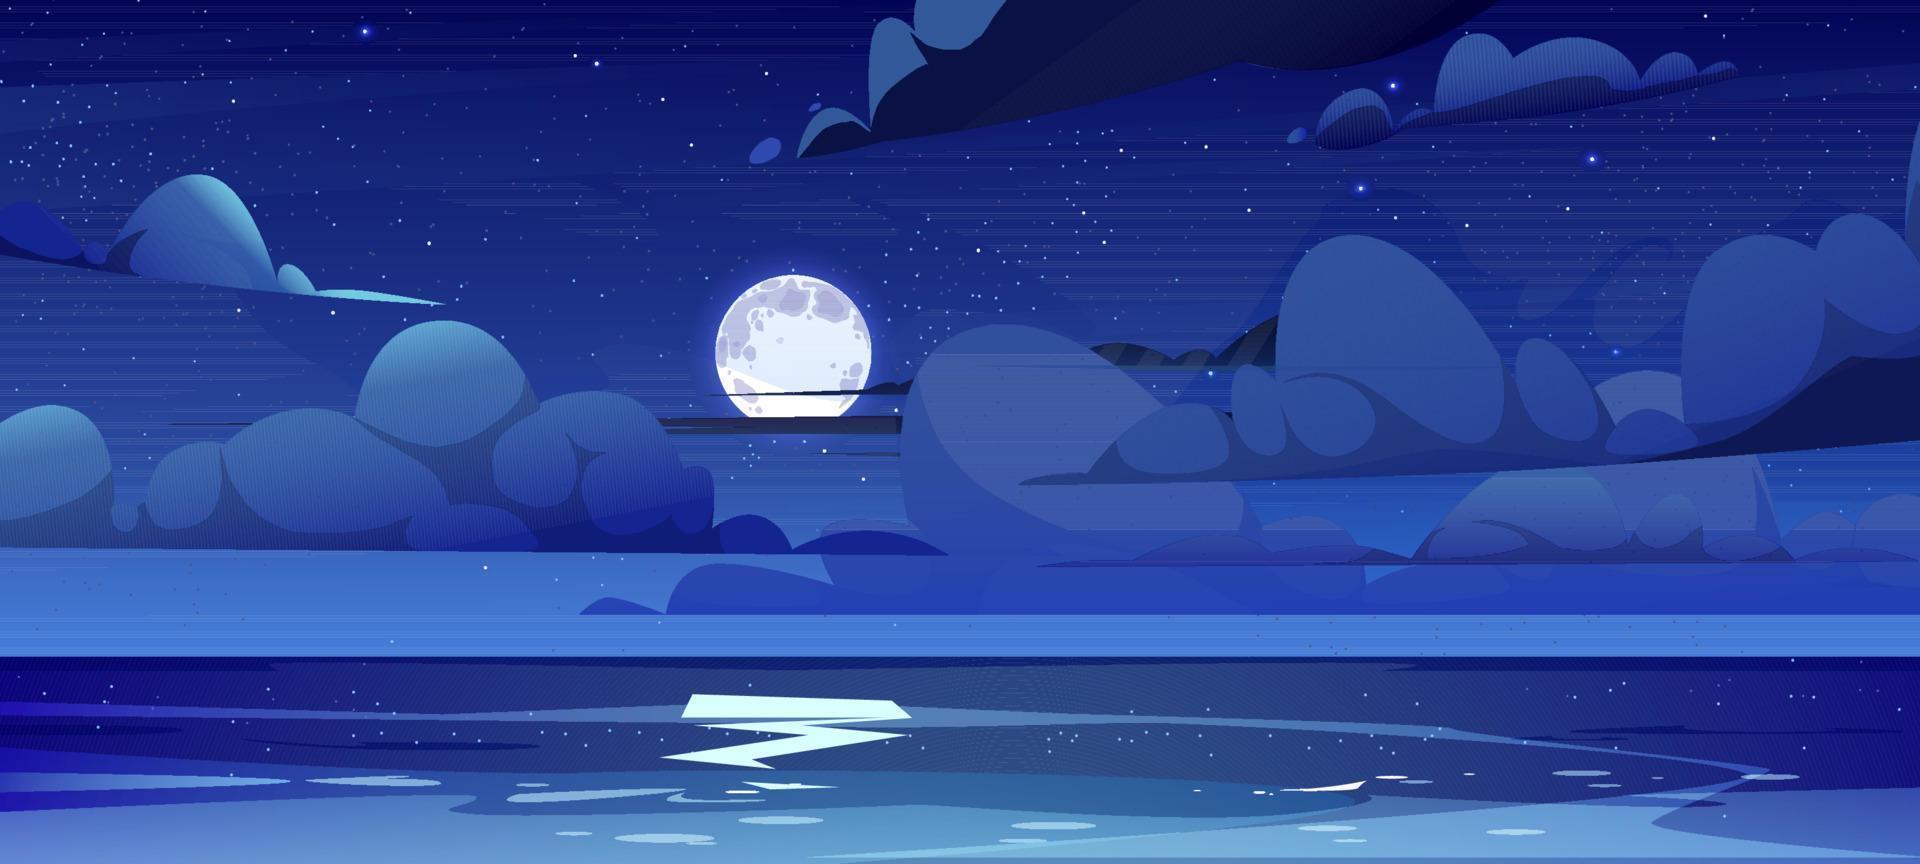 Sea landscape with moon in sky at night vector